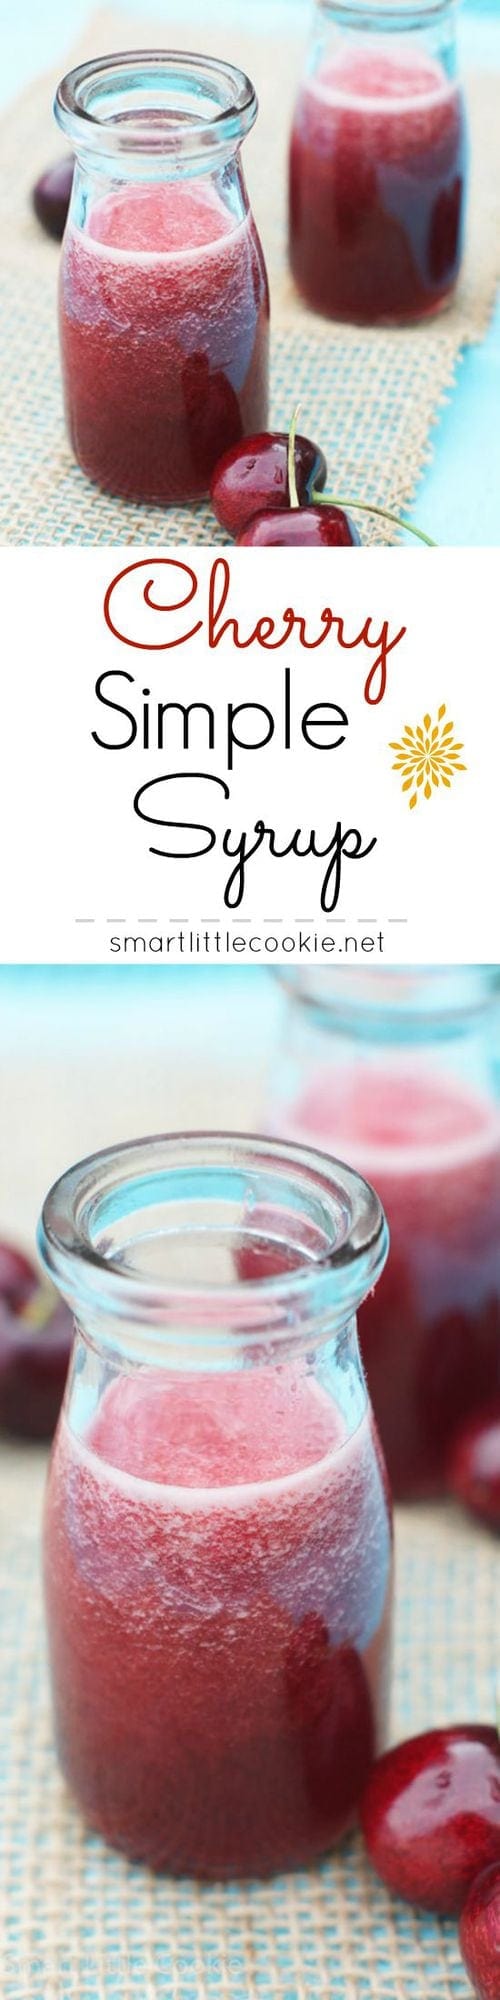 Pinterest graphic. Cherry simple syrup with text overlay.